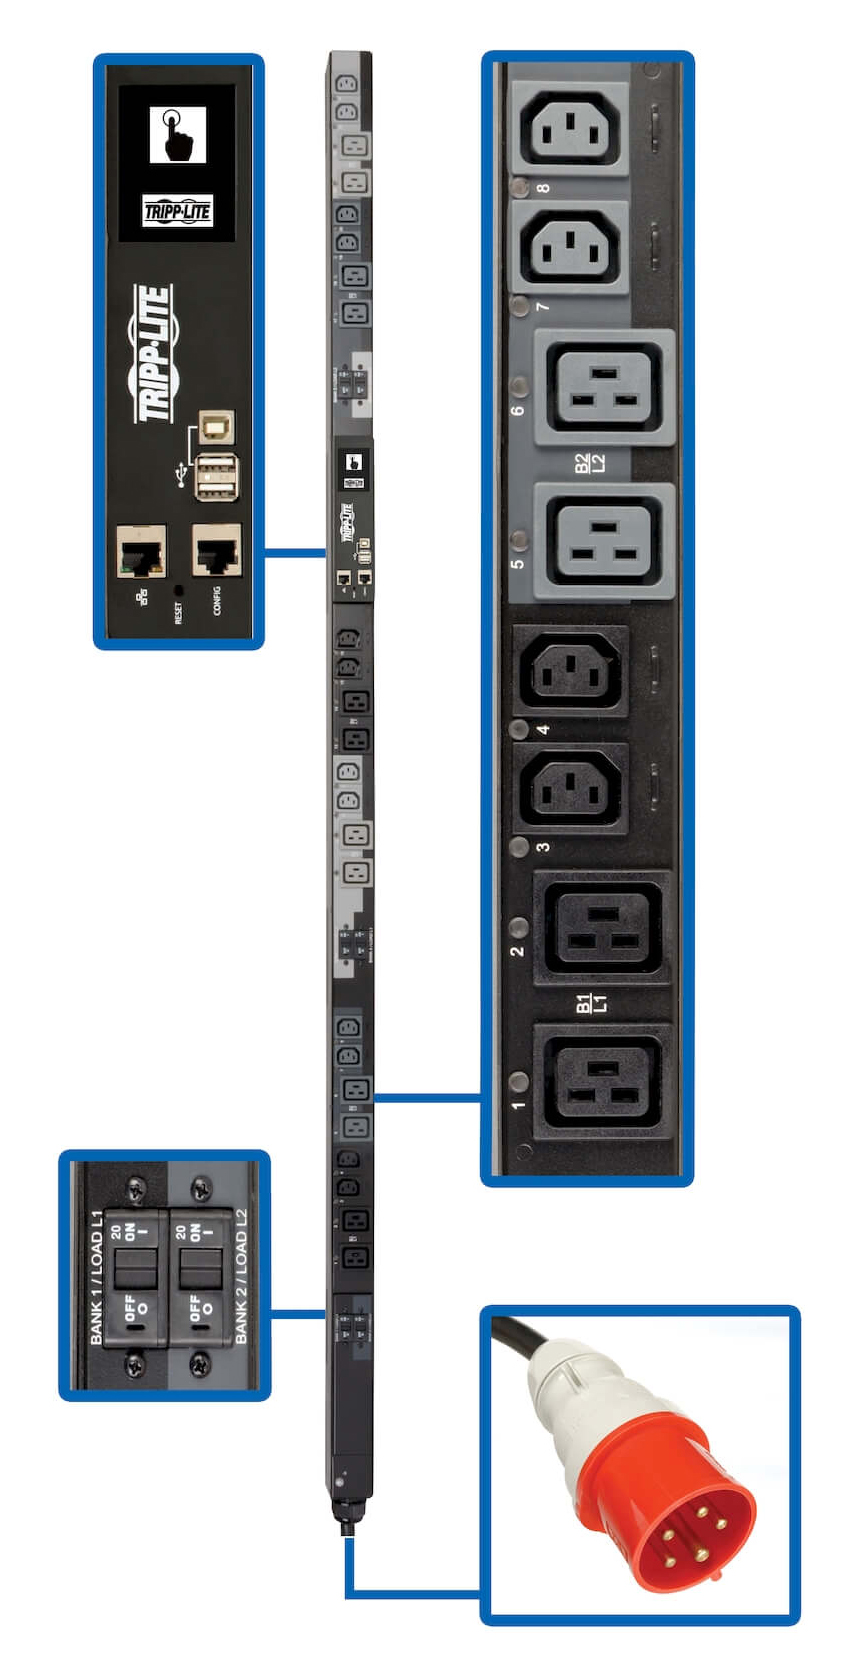 You Recently Viewed Tripp Lite PDU3XEVSR6G63A 27.7kW 3-Phase Switched PDU Image